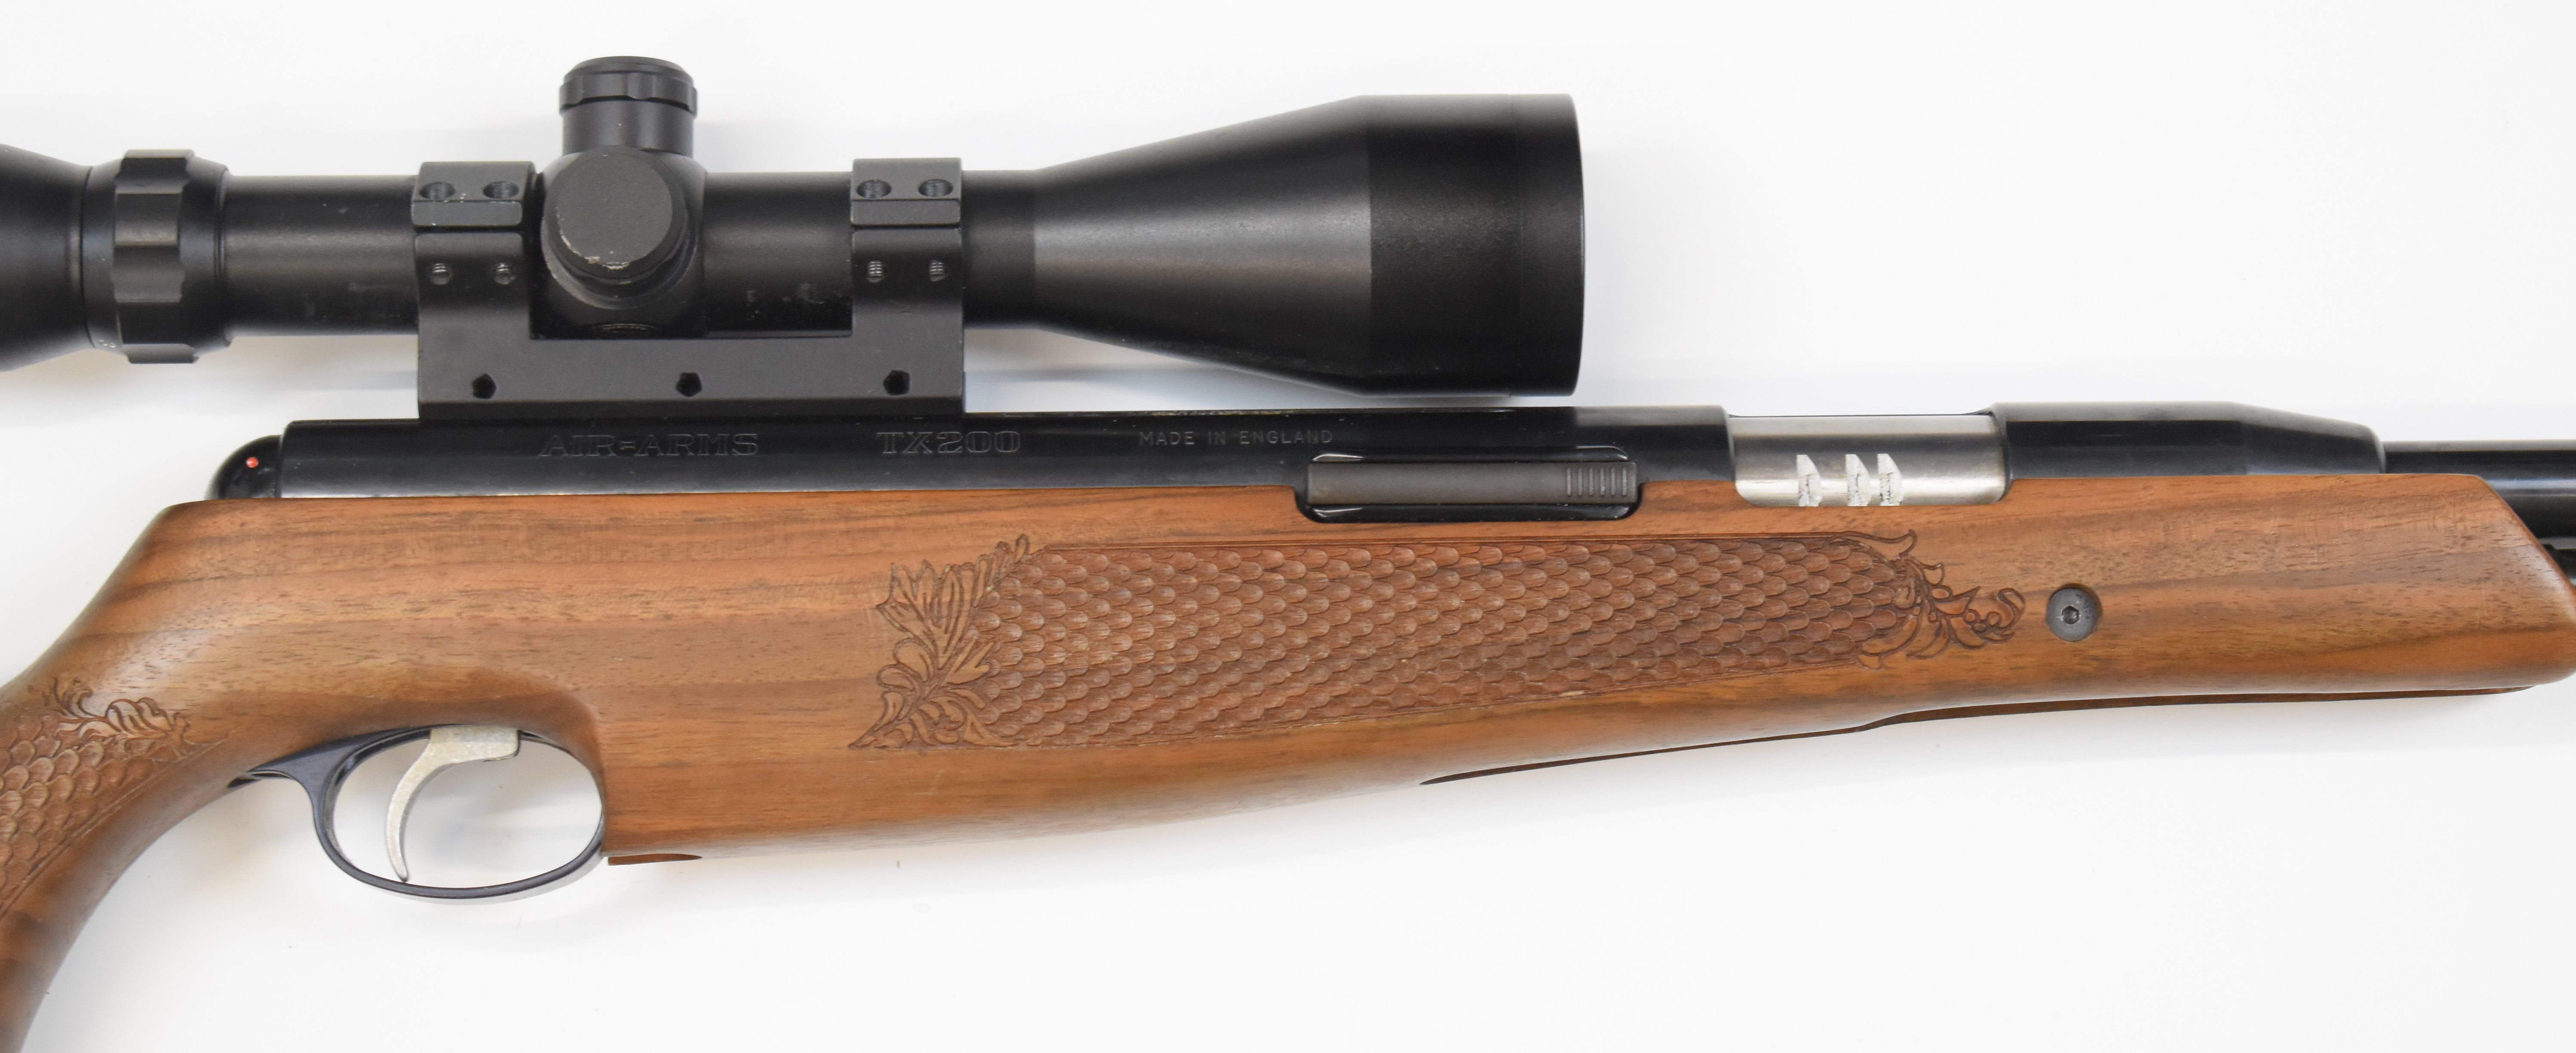 Air Arms TX200 .22 under-lever air rifle with carved semi-pistol grip and forend, adjustable - Image 4 of 9